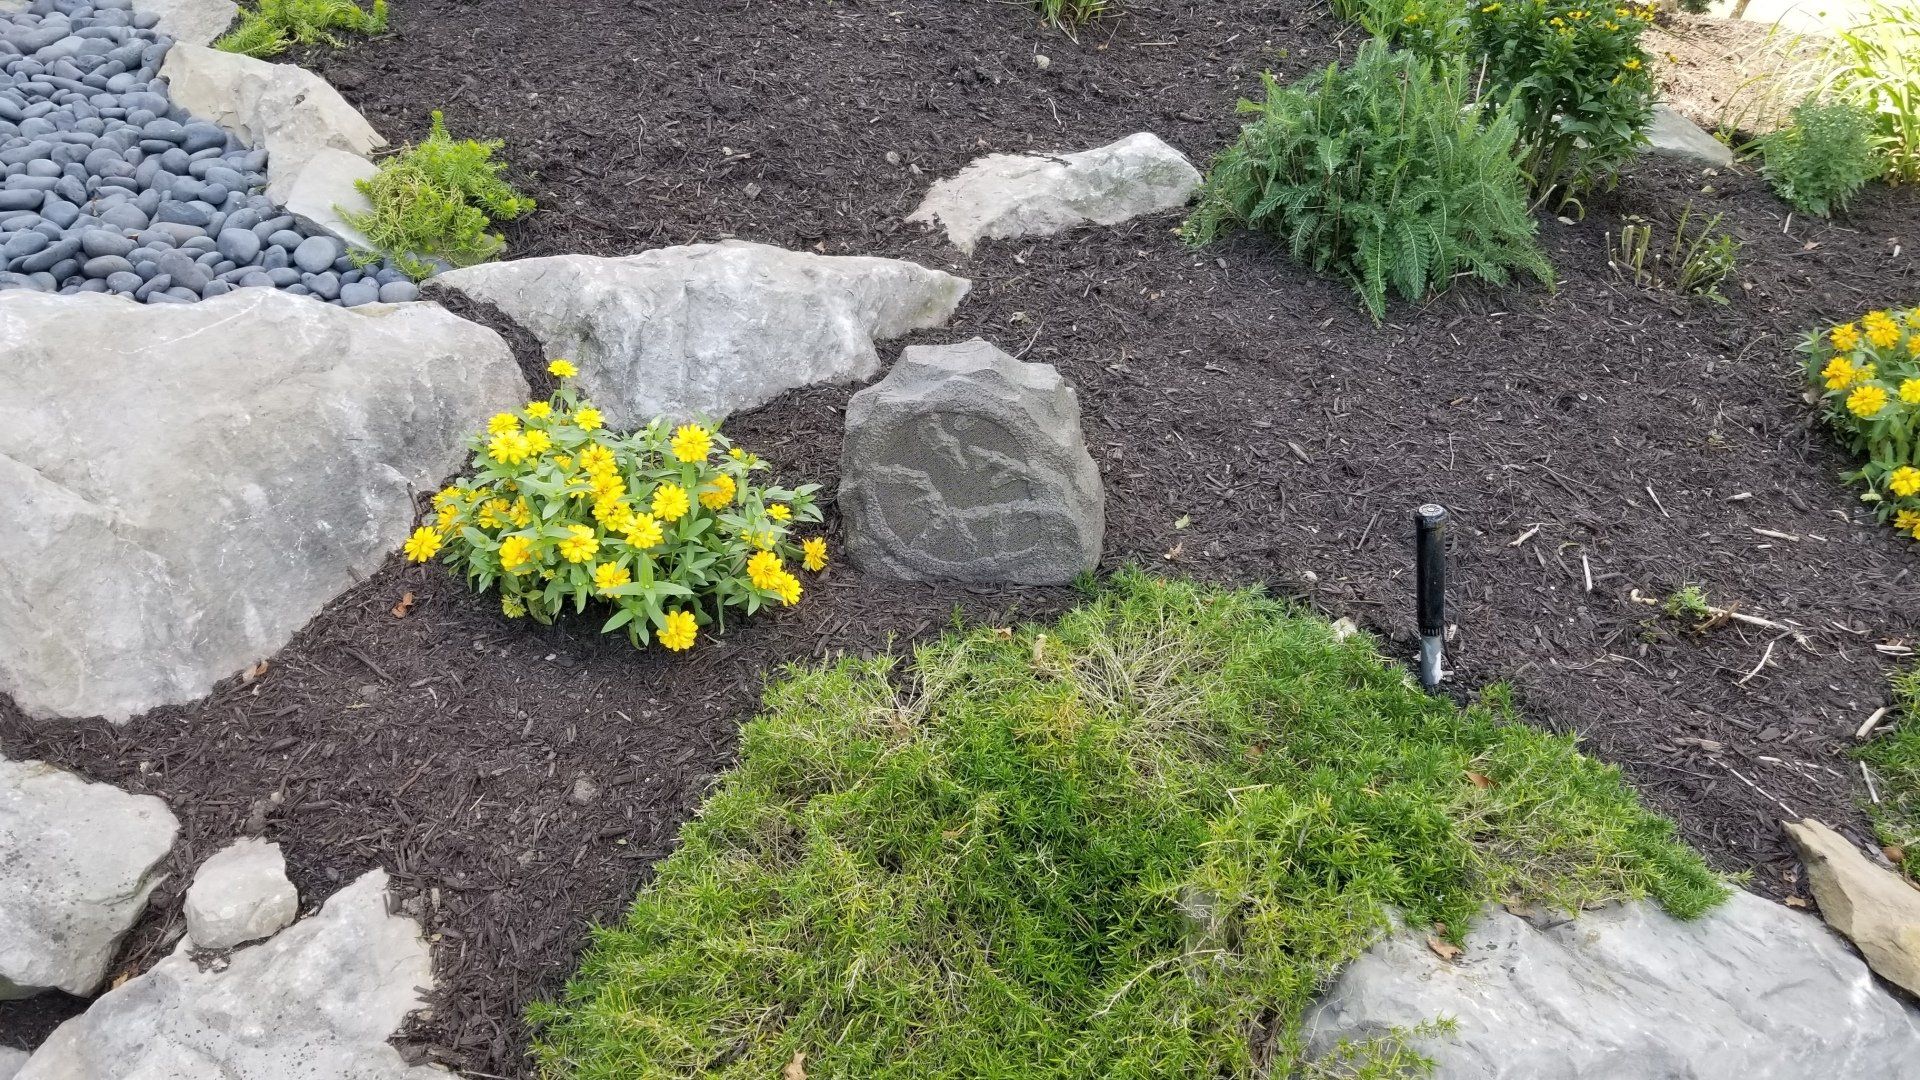 a rock speaker in the middle of a garden with yellow flowers